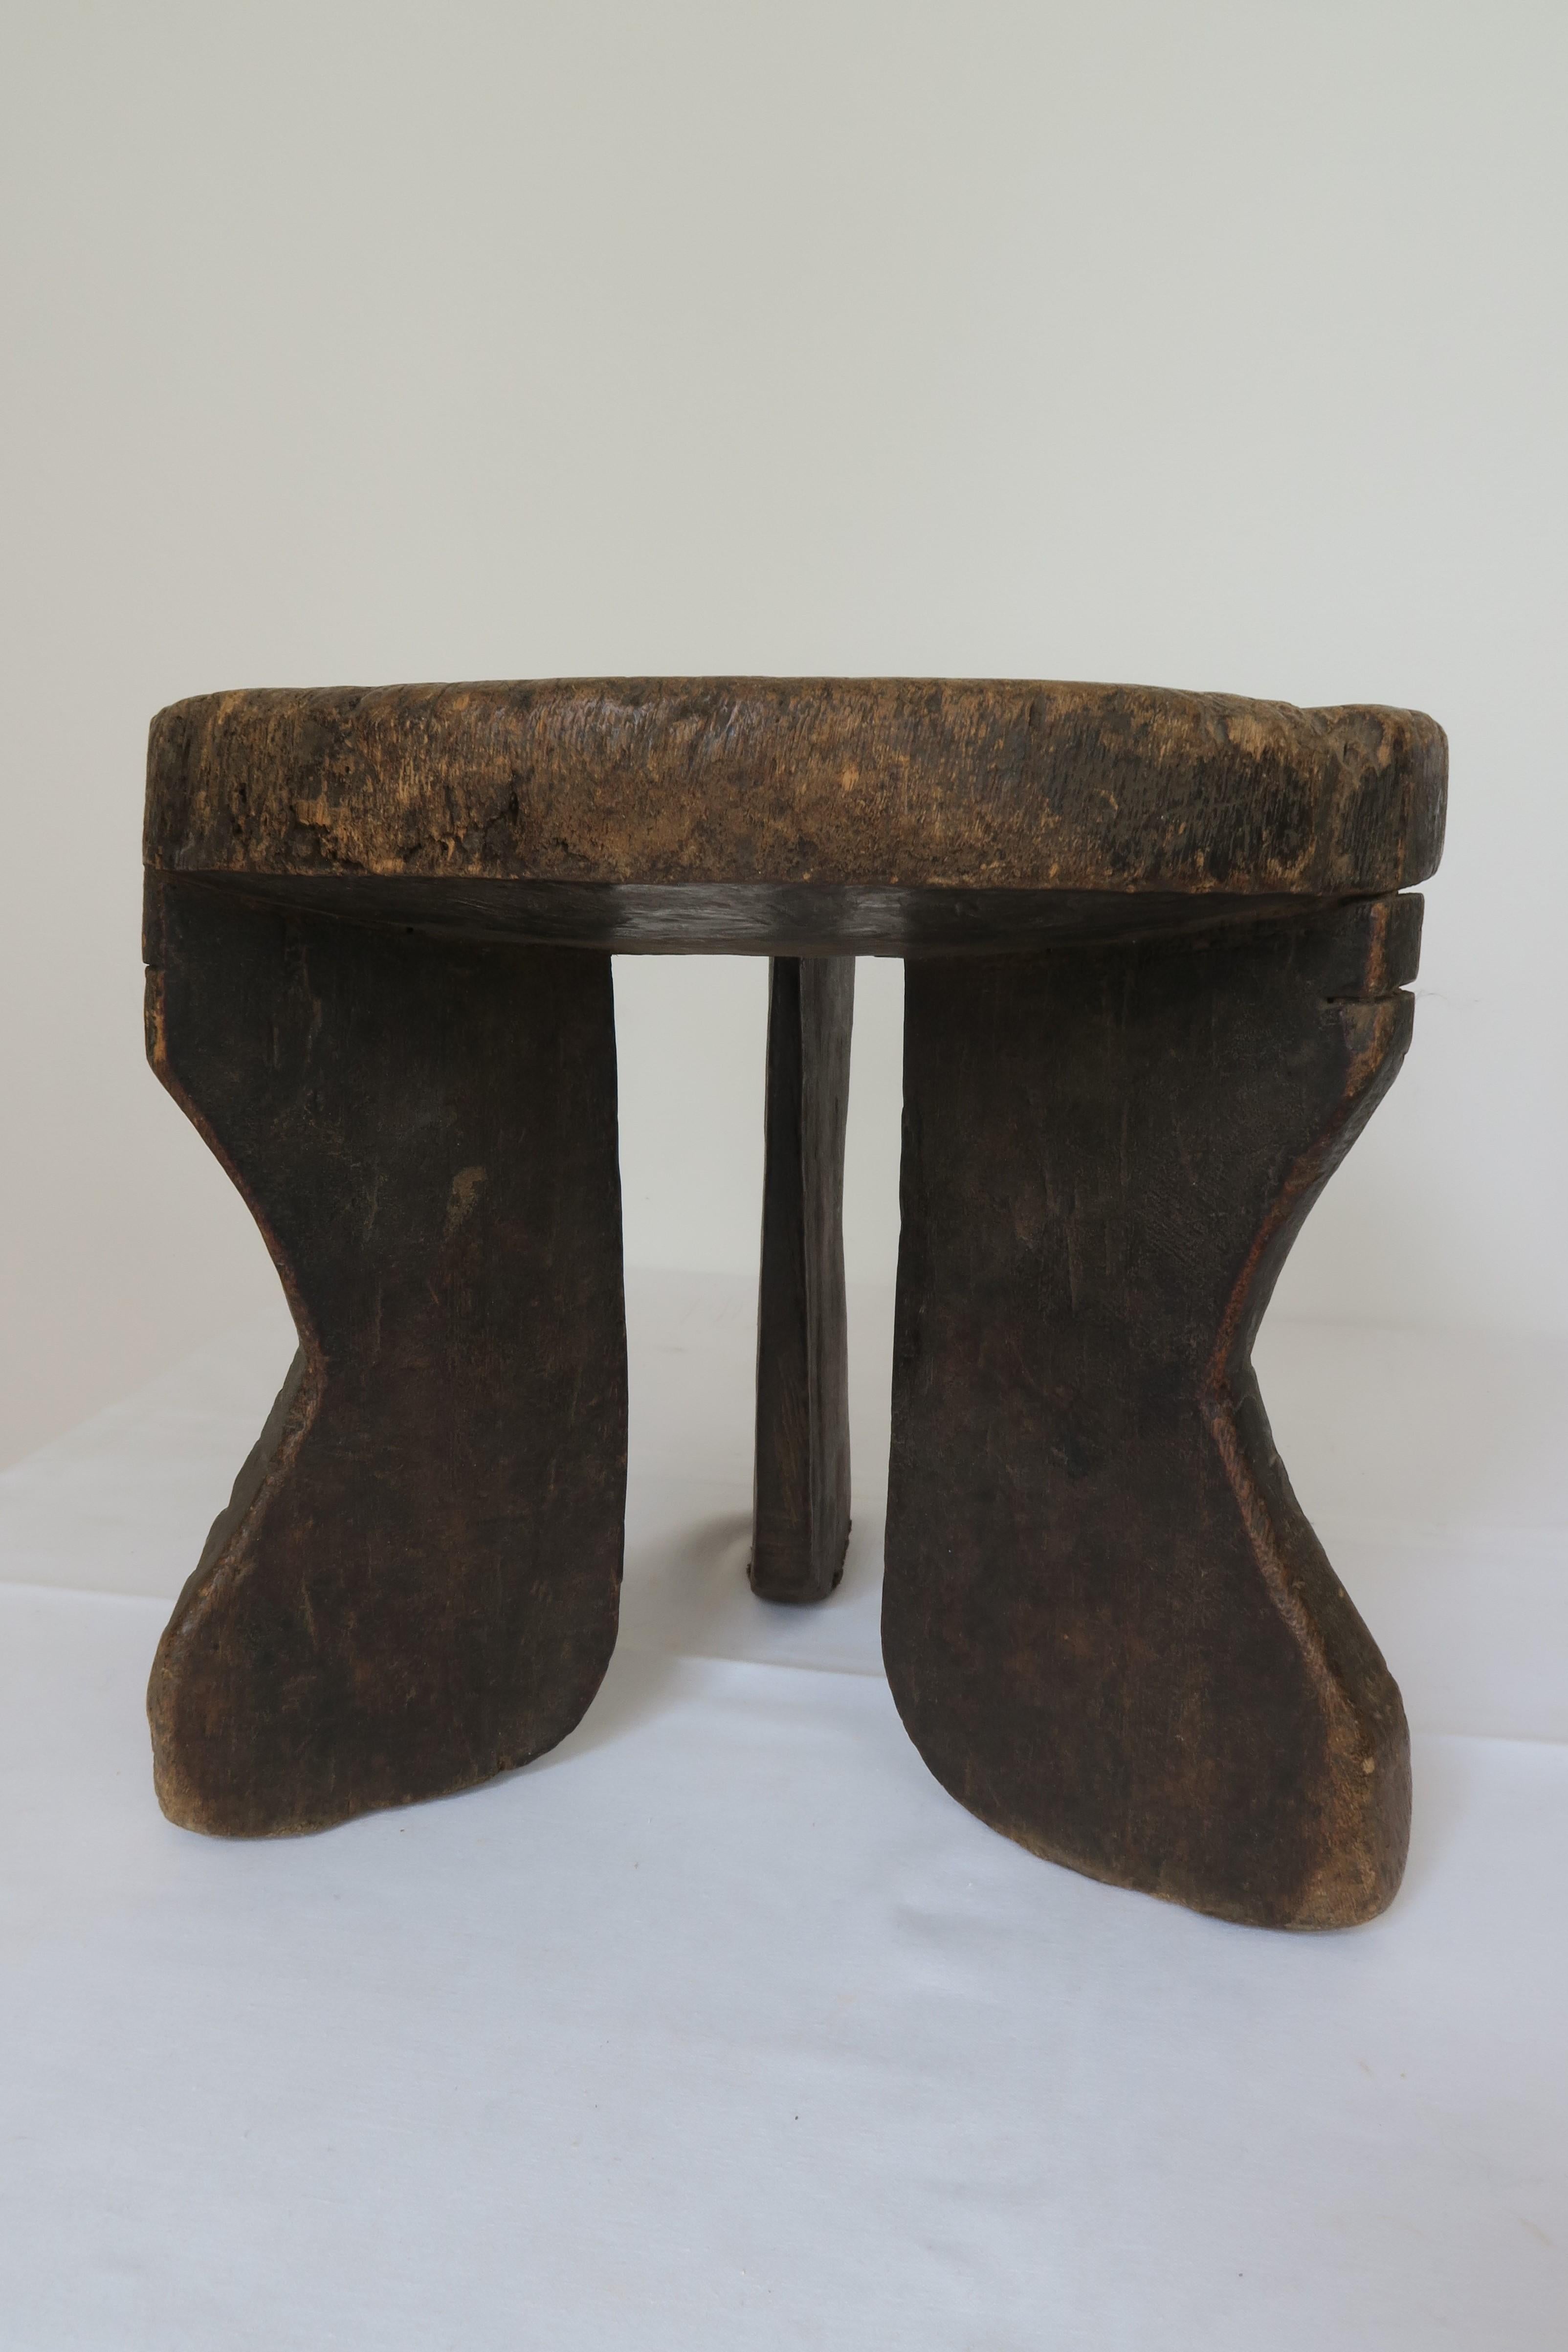 For sale is a graphic Hehe stool with three ridged legs and old patina.

The Hehe people lived in isolation on a highland in southwestern Tanzania, northeast of Lake Nyasa. With the exception of some pastoralists on the plains and some keeping a